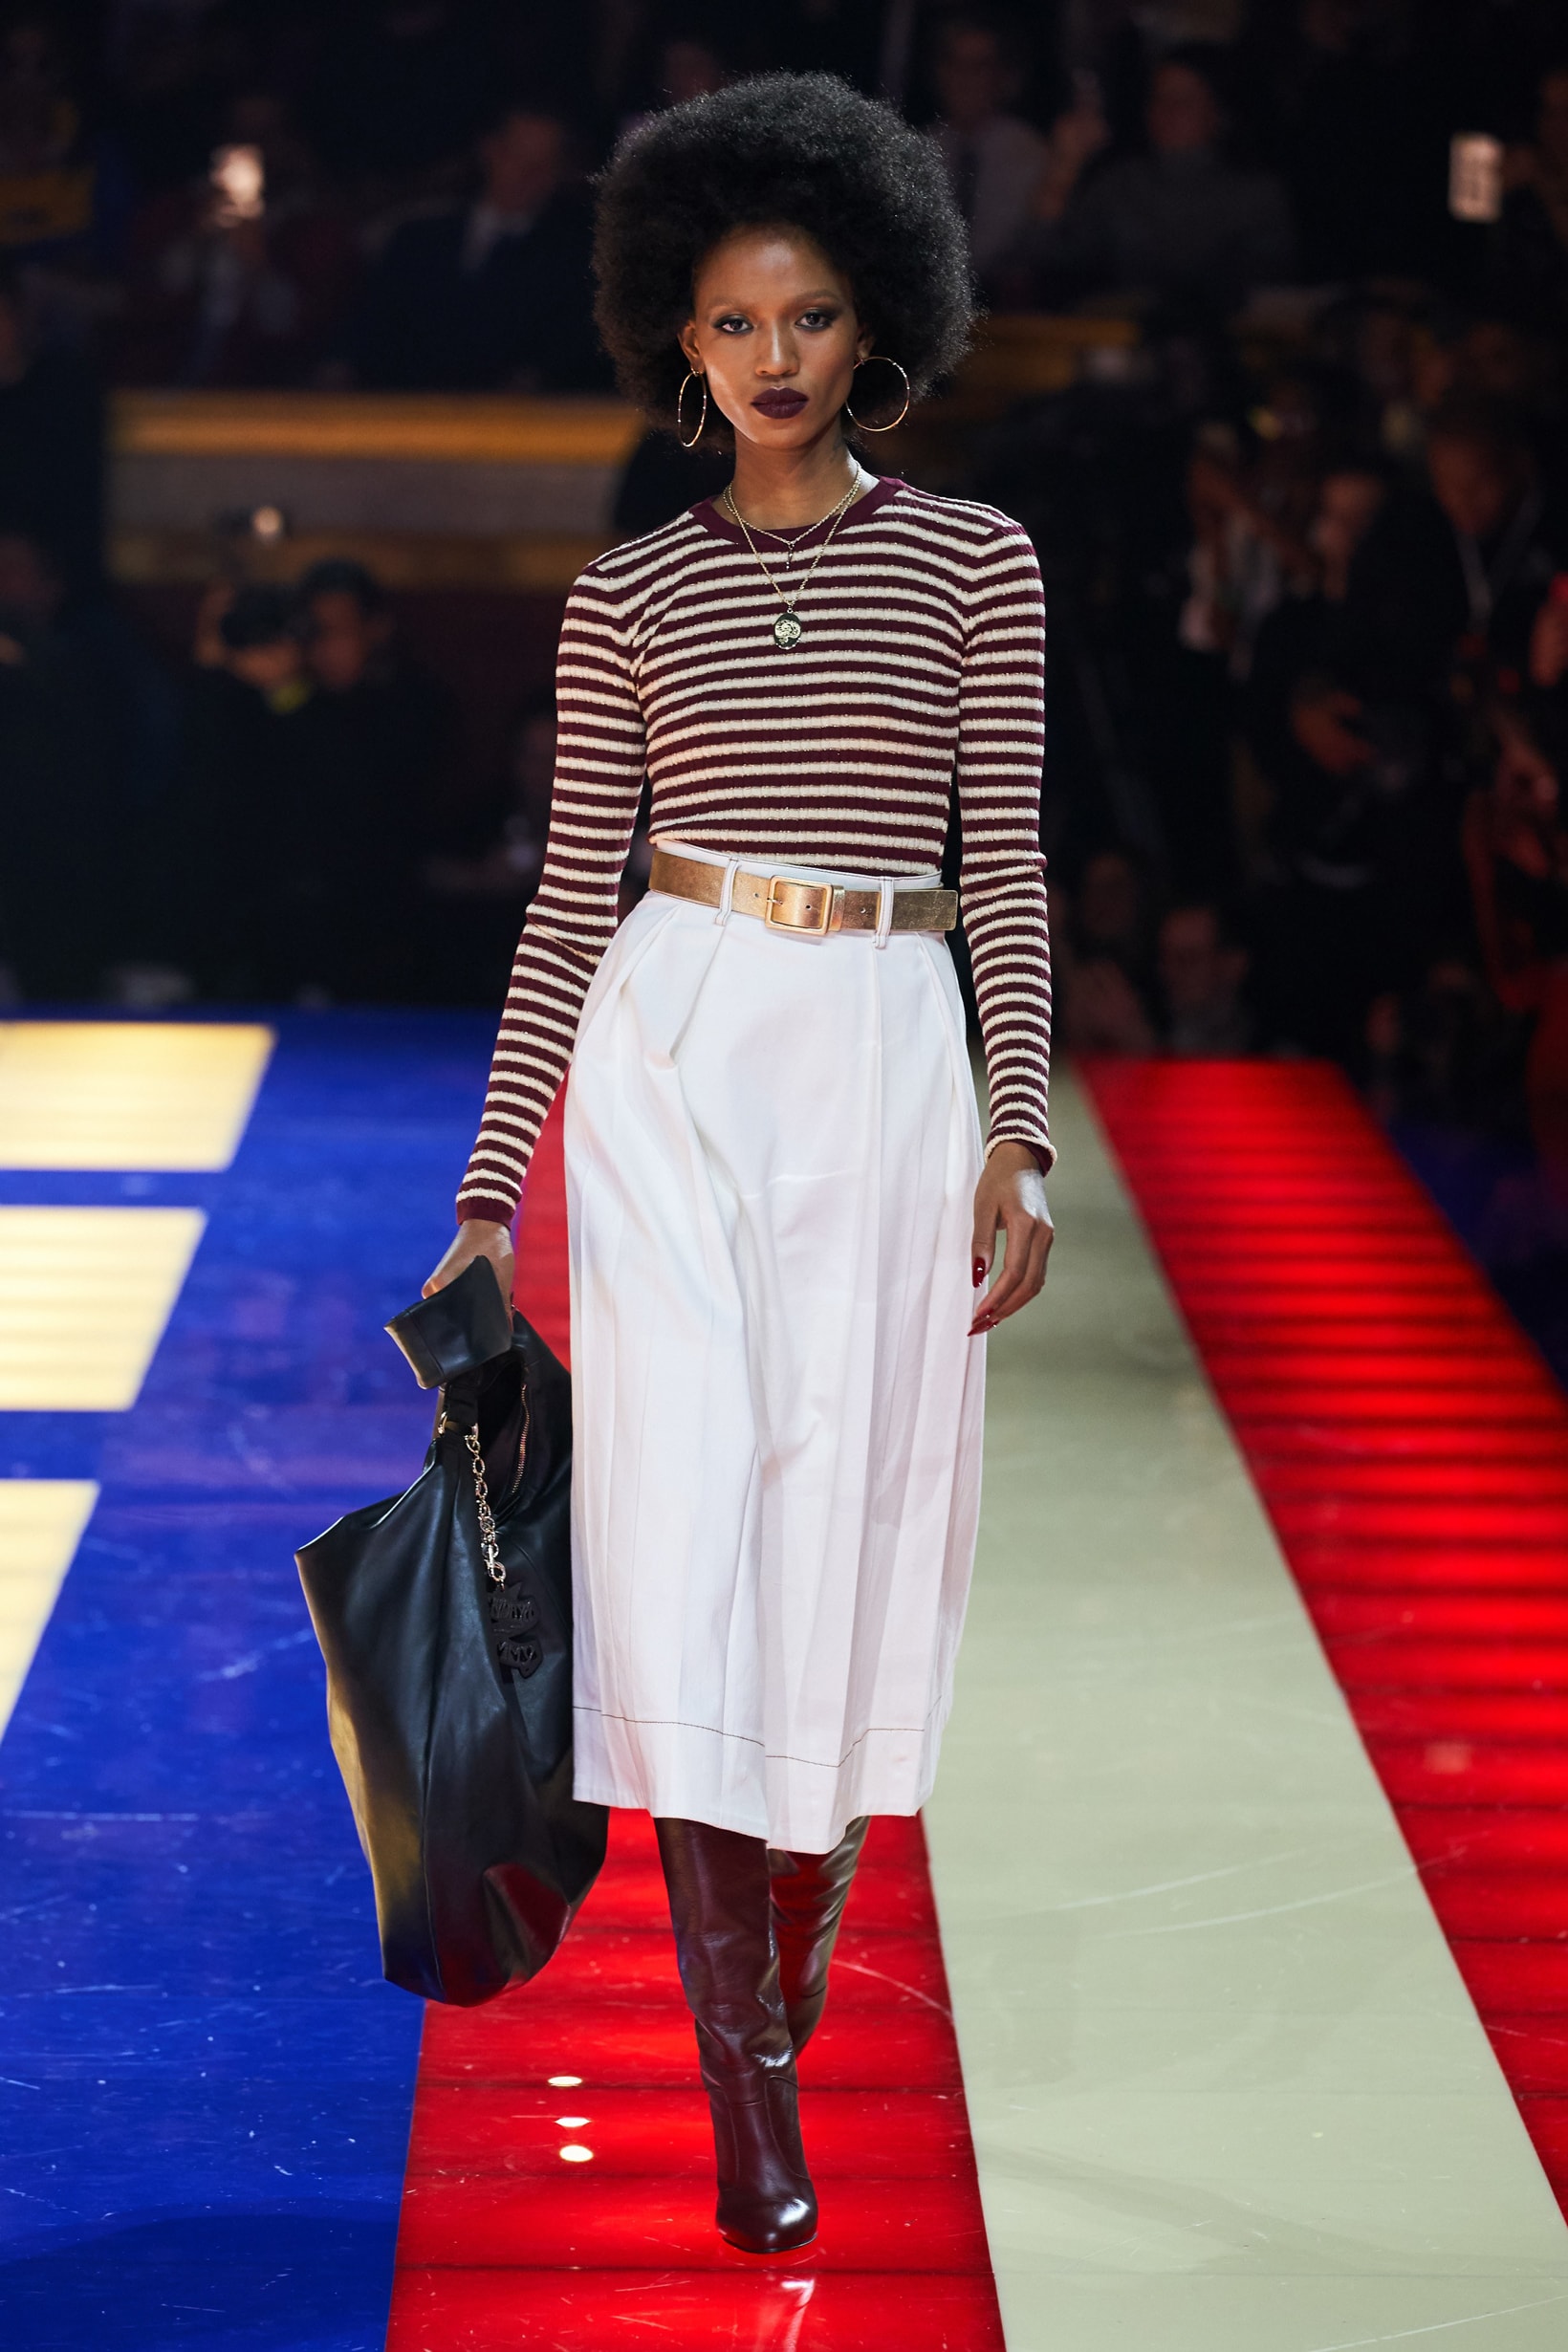 Tommy Hilfiger TommyNow Zendaya Spring 2019 Paris Fashion Week Show Collection Adesuwa Aighewi Striped Top Pants White